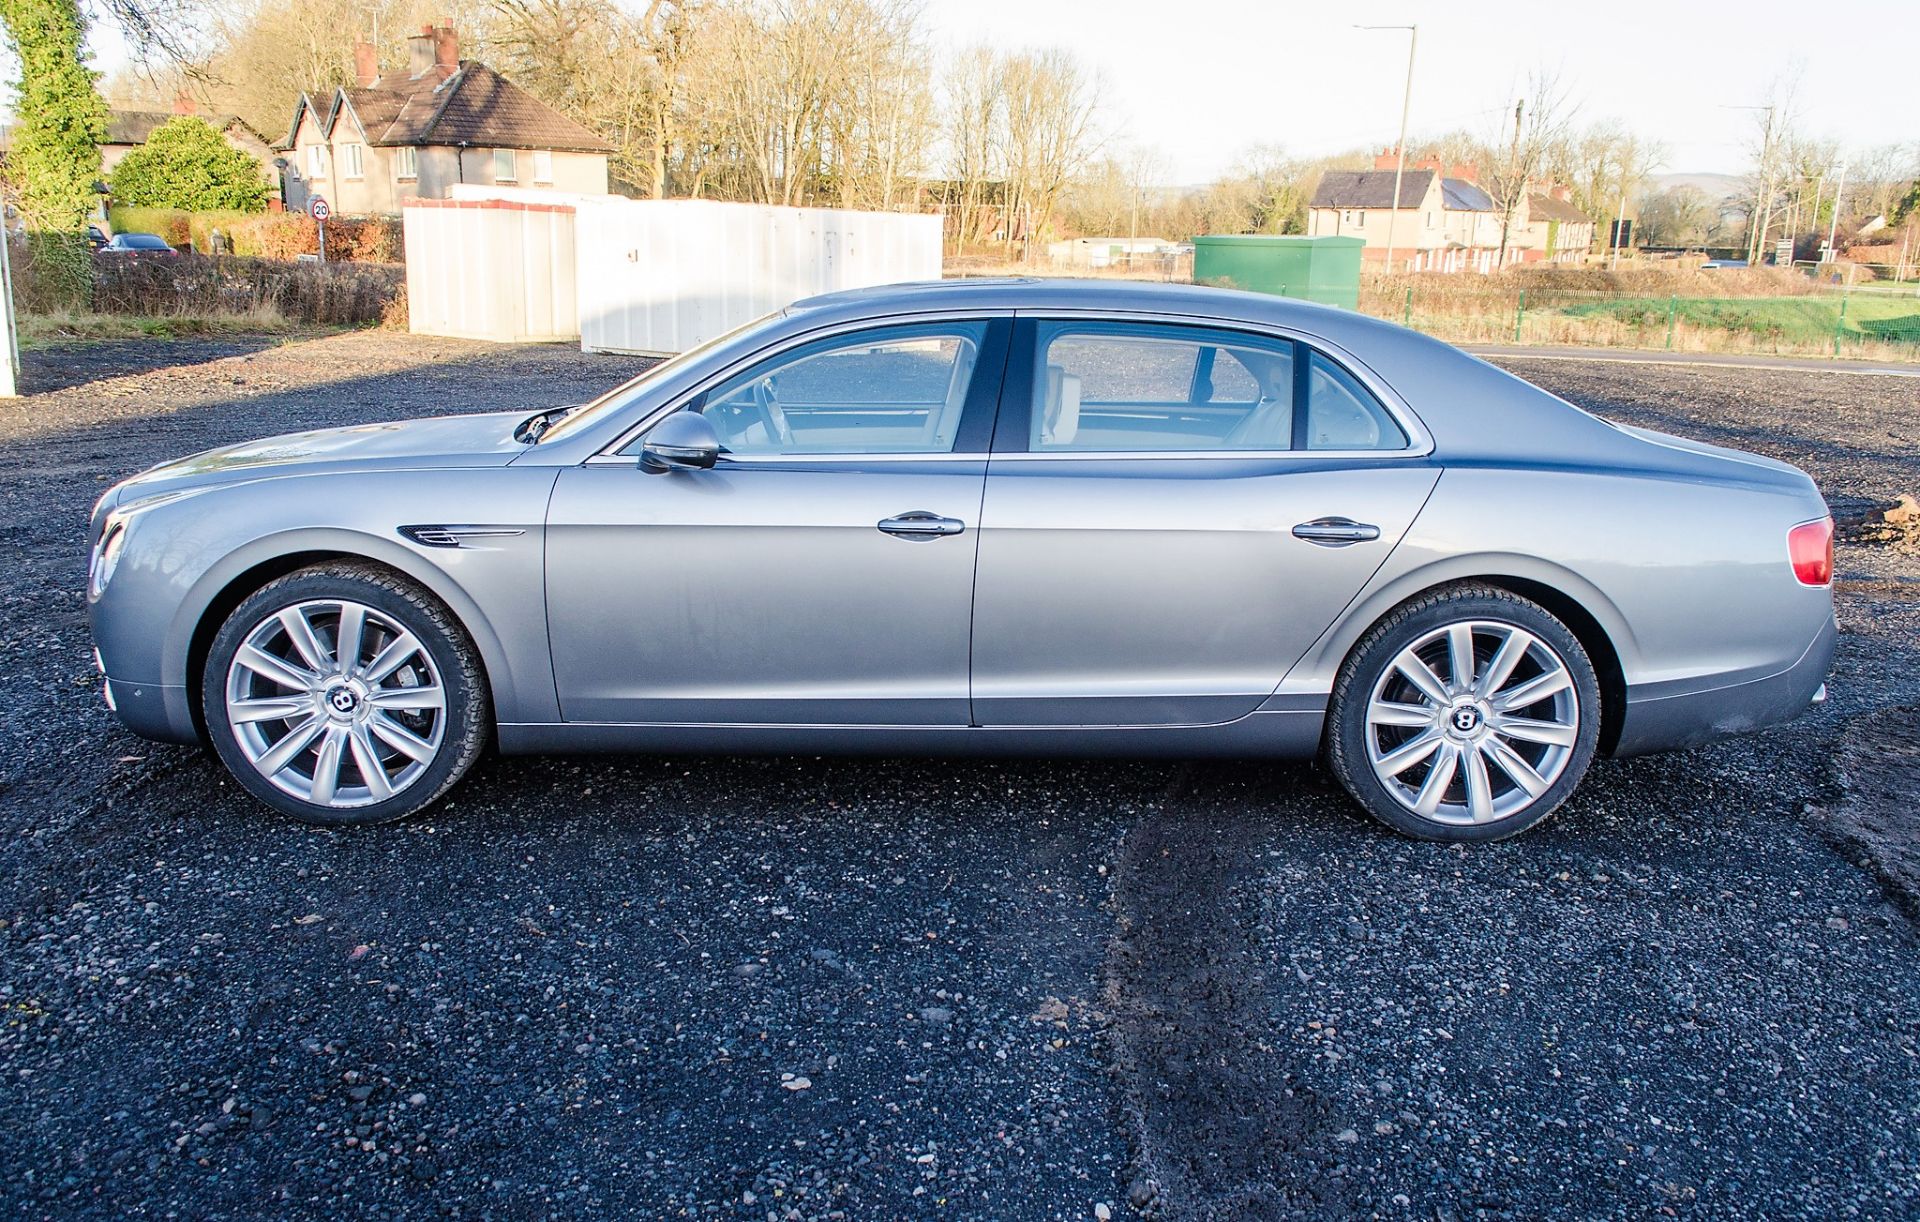 Bentley Flying Spur 6.0 W12 automatic 4 door saloon car Registration Number: MJ63 NHM Date of - Image 10 of 51